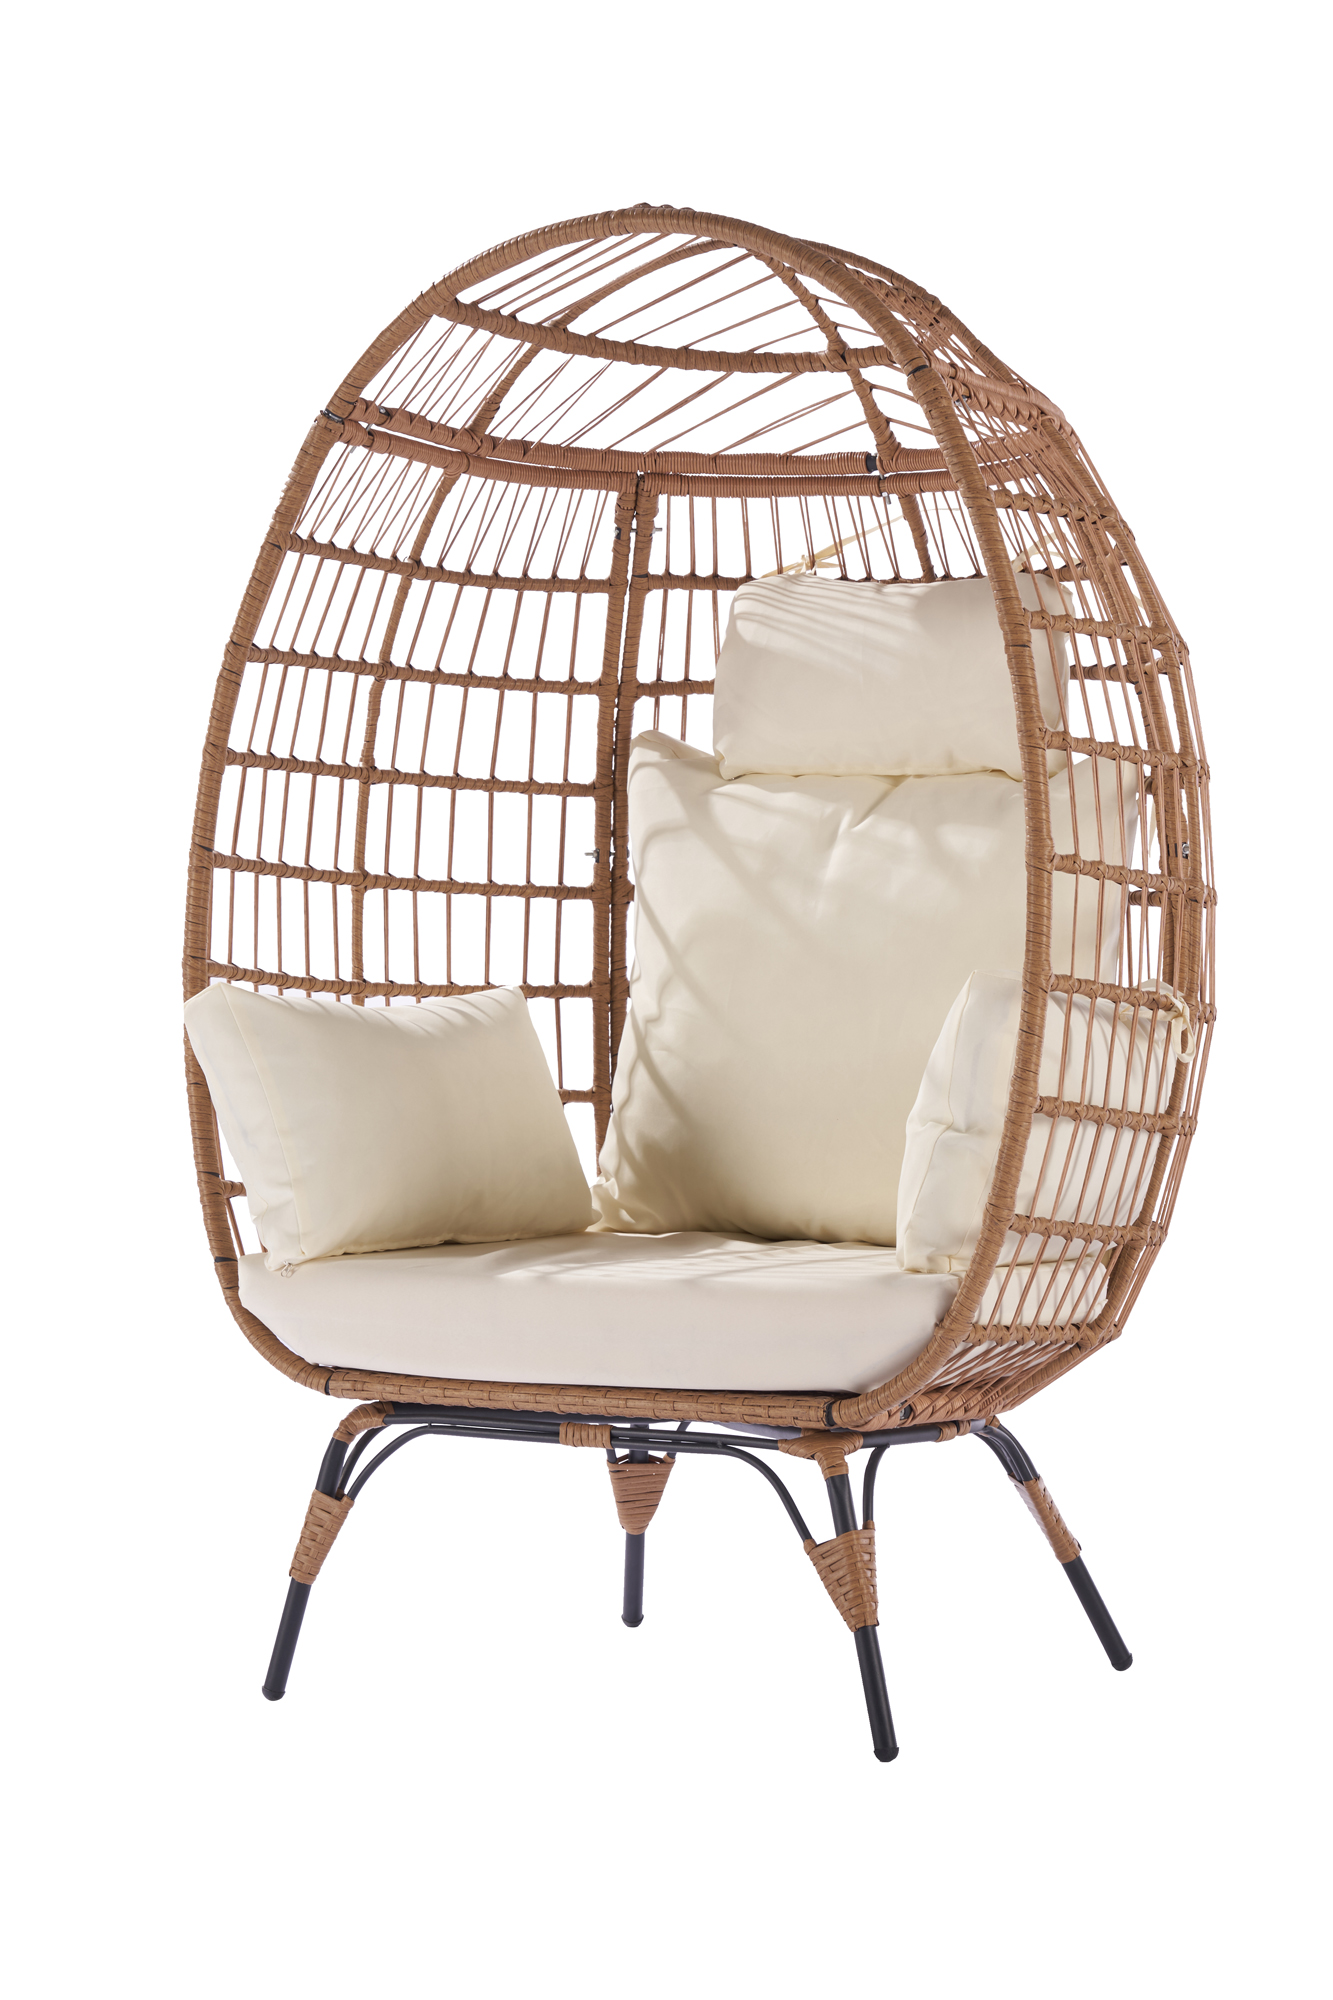 Wicker Egg Chair, Oversized Indoor Outdoor Boho Lounger Chair Stationary Egg Basket Chair, All-Weather 440lb Capacity Patio Chair, Beige - image 1 of 8